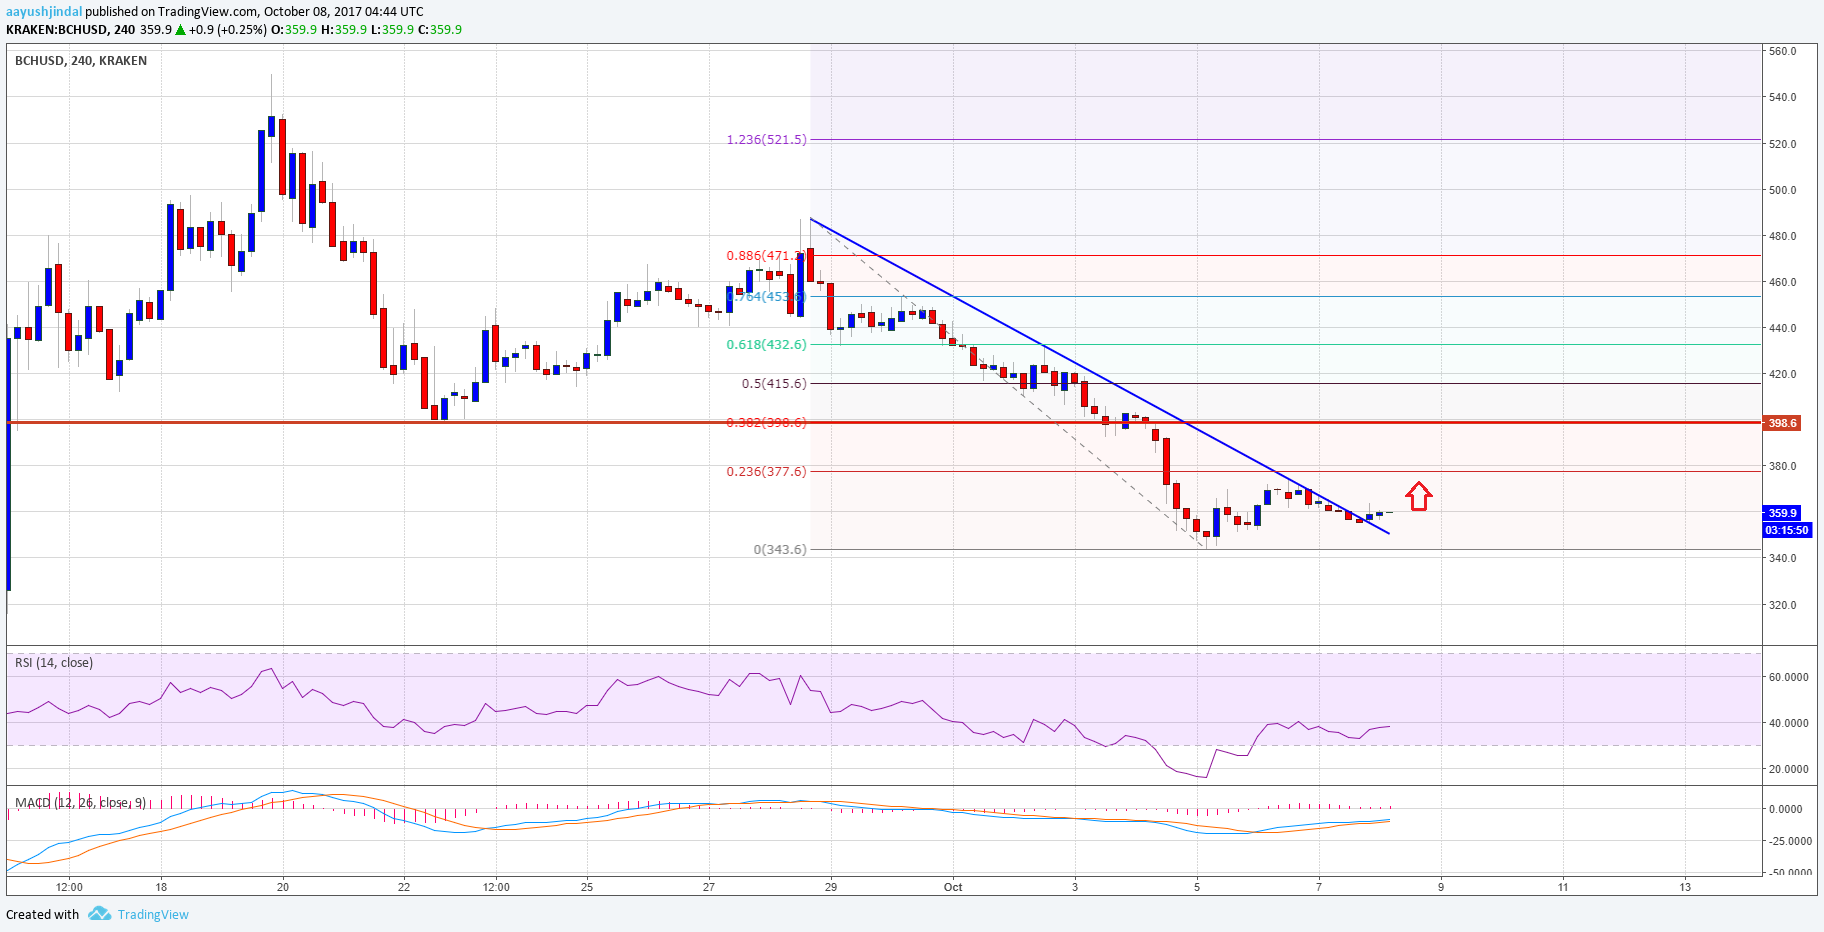 Bitcoin Cash Price Weekly Analysis – BCH/USD Forming Bottom?